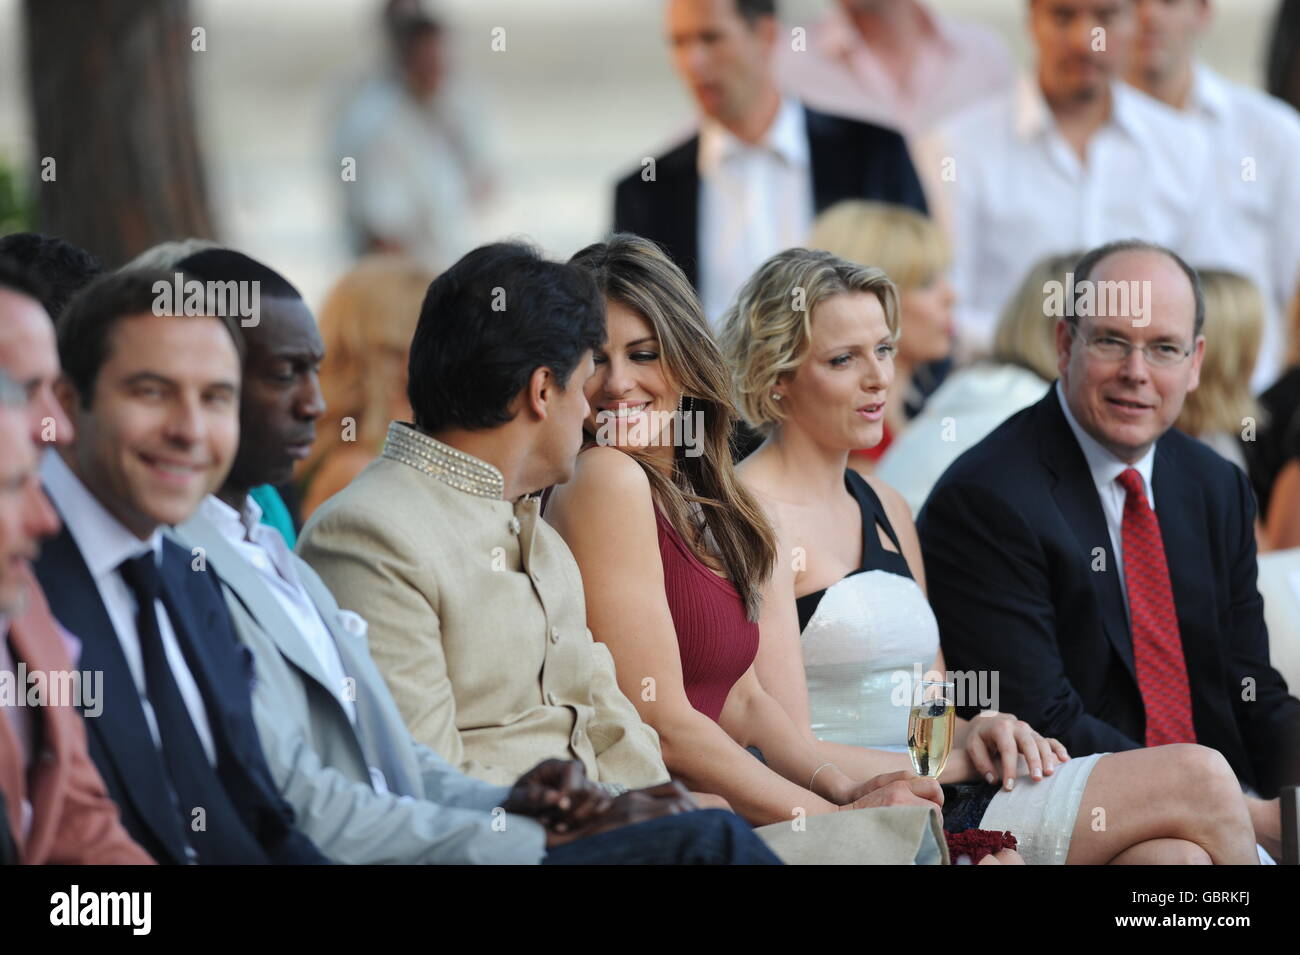 Elizabeth Hurley (centre) and her husband Arun Nayar during the Fashion Show at The Amber Lounge, Le Meridien Beach Plaza Hotel, Monaco. Stock Photo